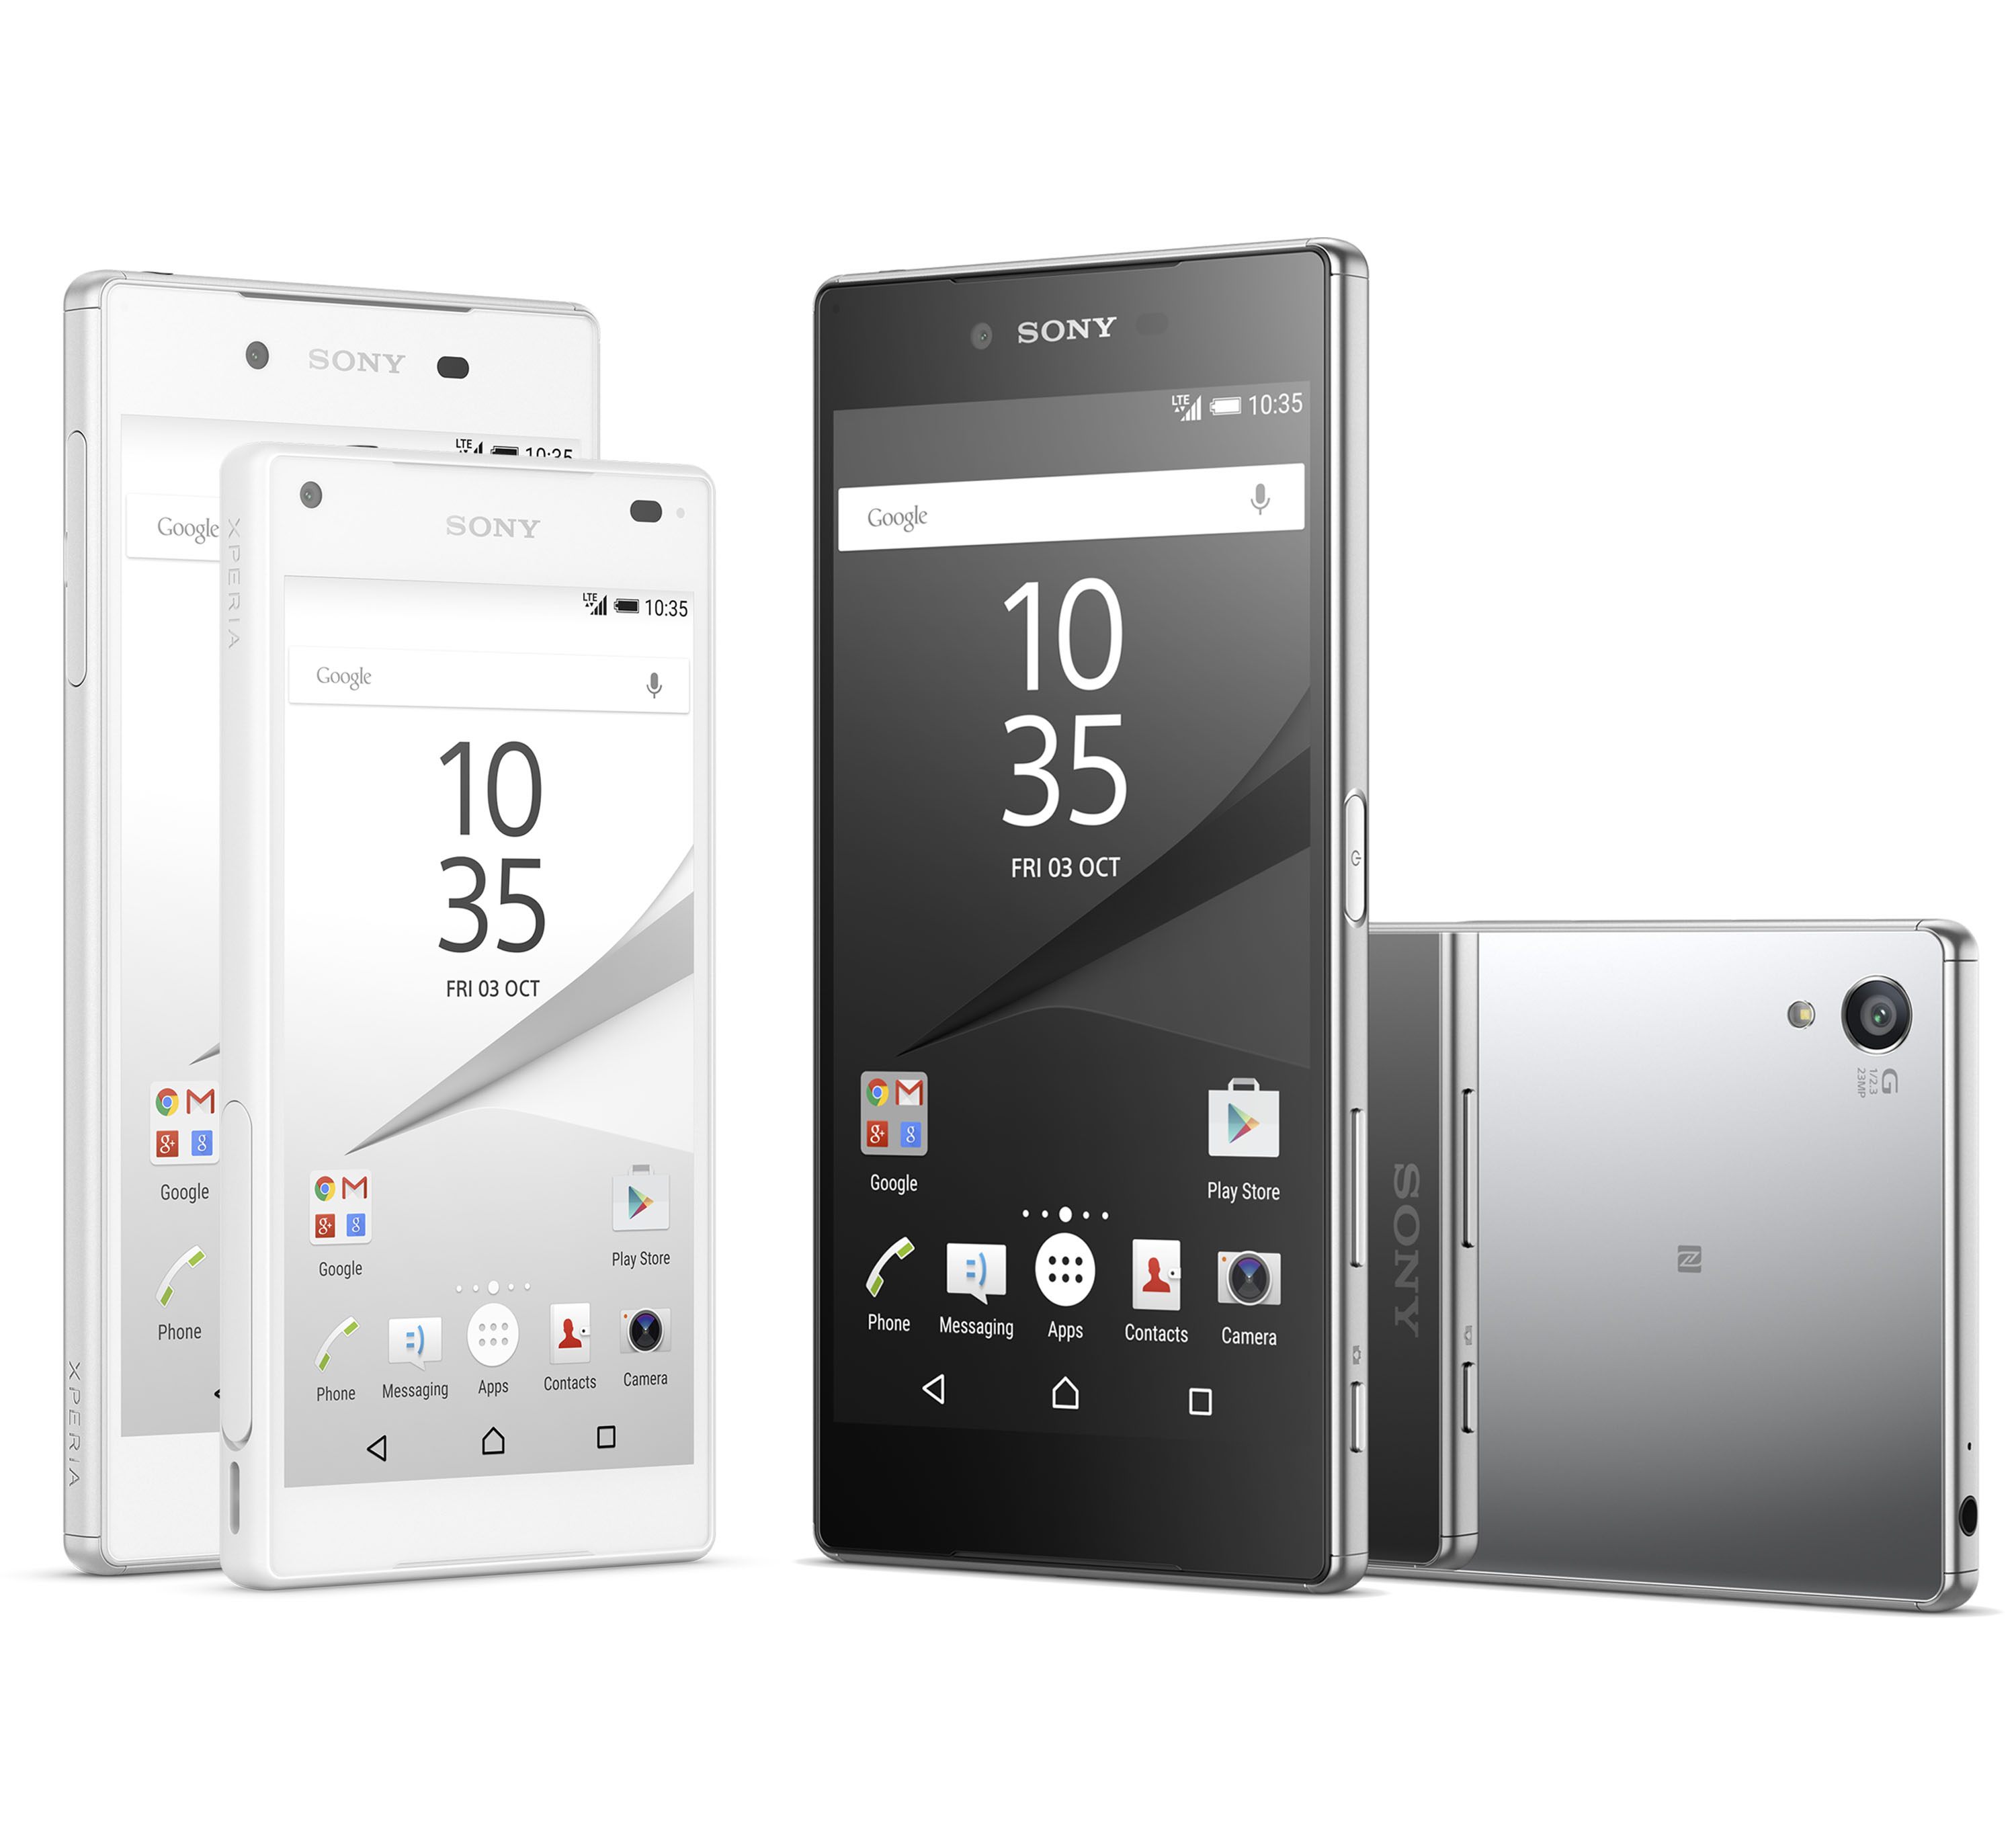 IFA 2015: Sony Xperia Z5, Z5 Compact and Z5 Premium announced